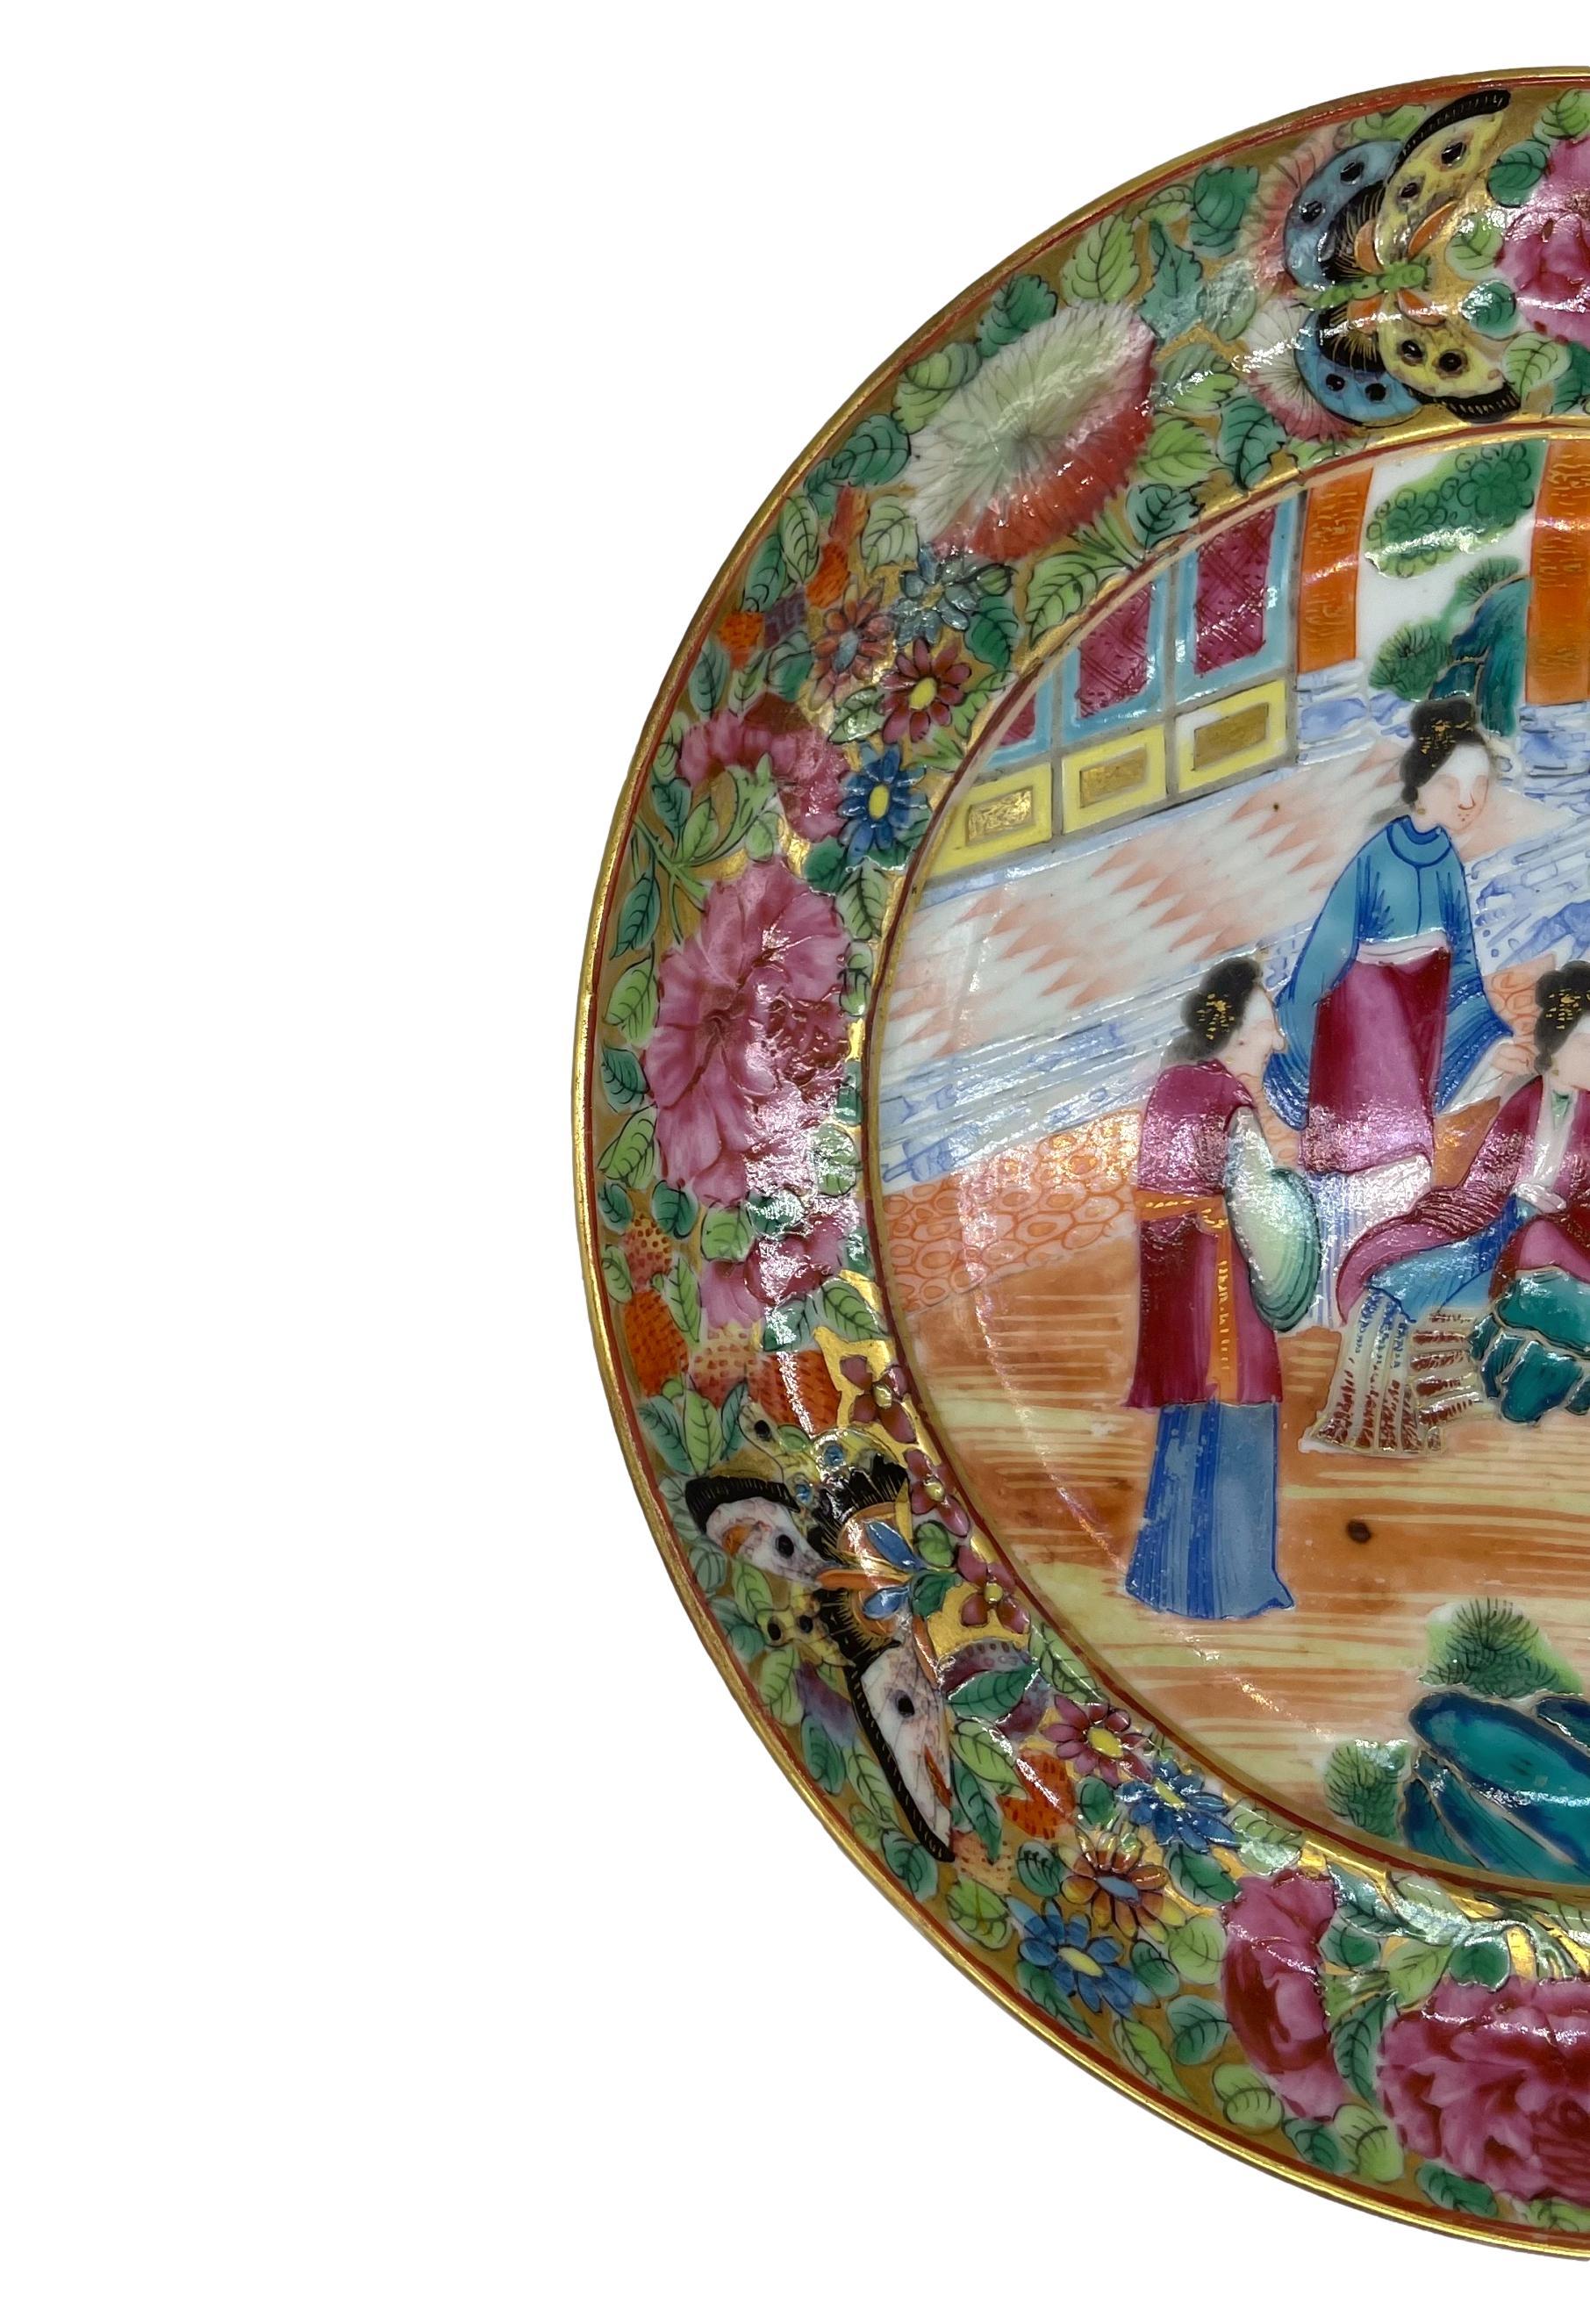 Chinese Export Porcelain Rose Mandarin plate, ca. 1840, with a central design depicting a pavilion scene with six figures at a Wei Qi board, with hyper-vivid enamels and fine gilt accents, with multi-layered raised polychrome enamels, with blue